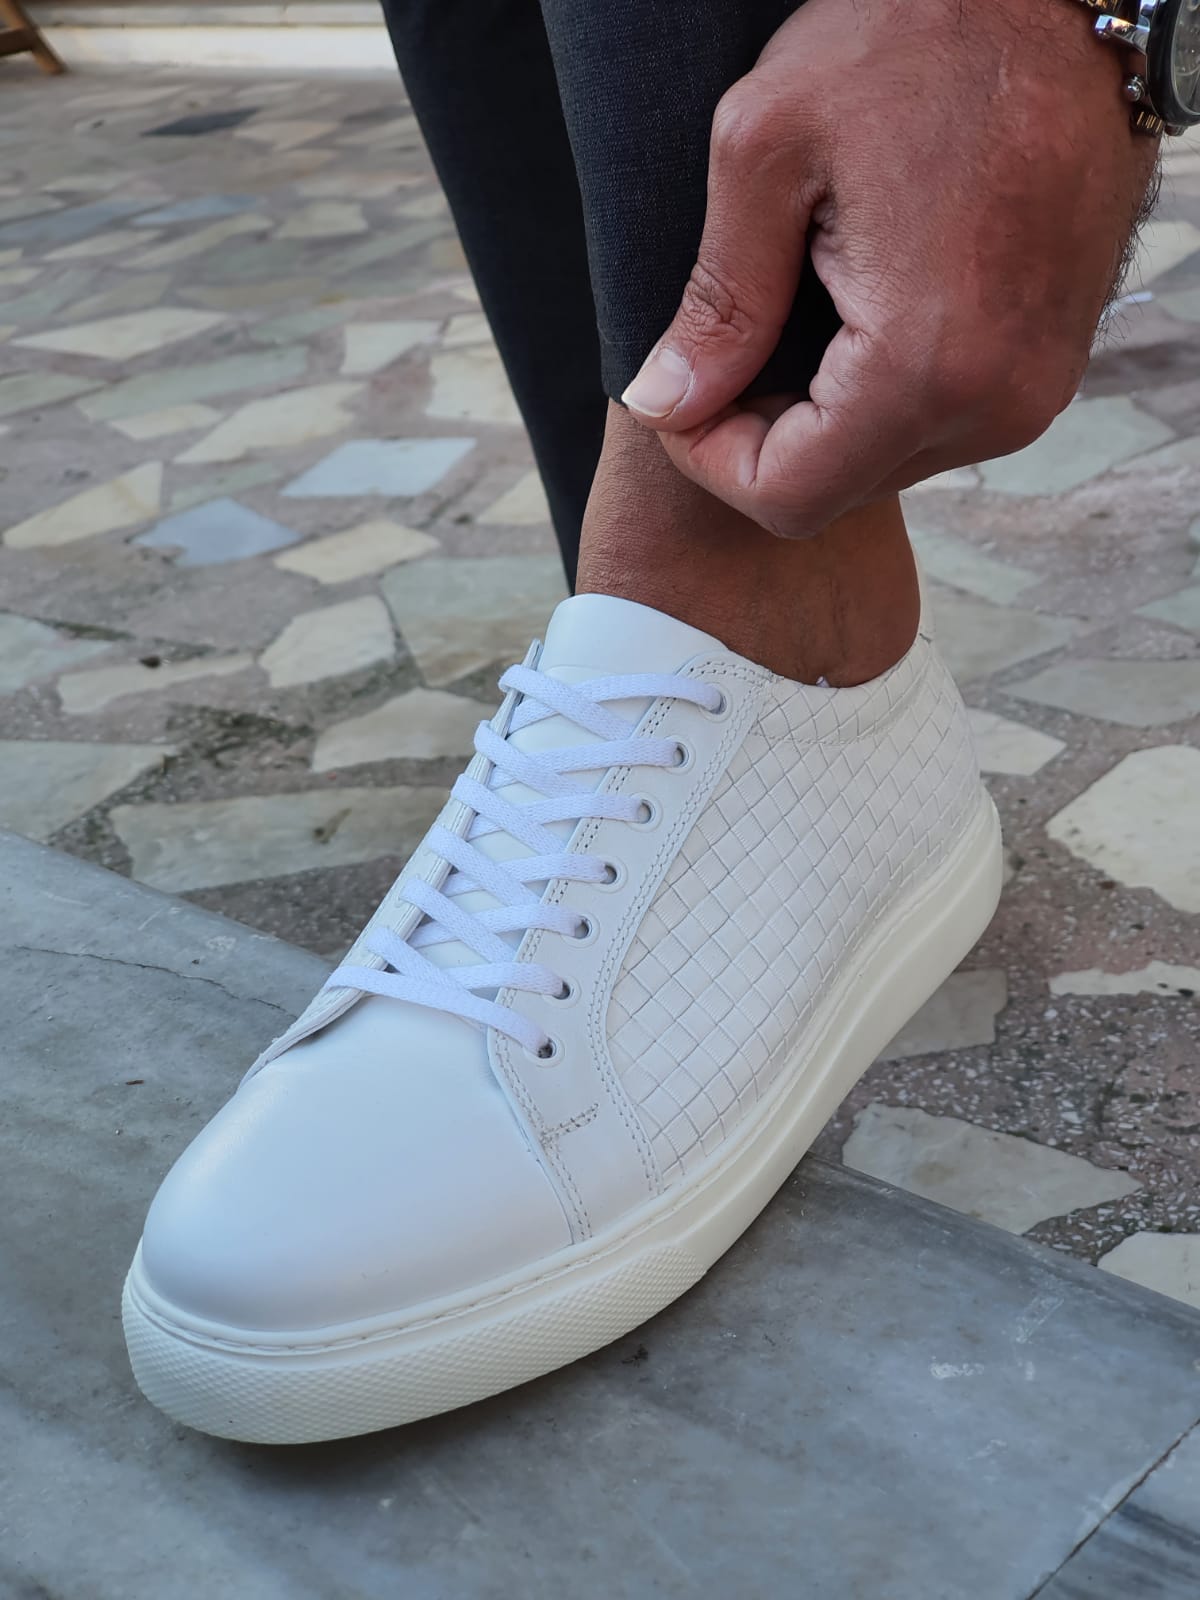 SARDINELLI WHITE SPECIAL EDITION* CALF LEATHER SNEAKERS